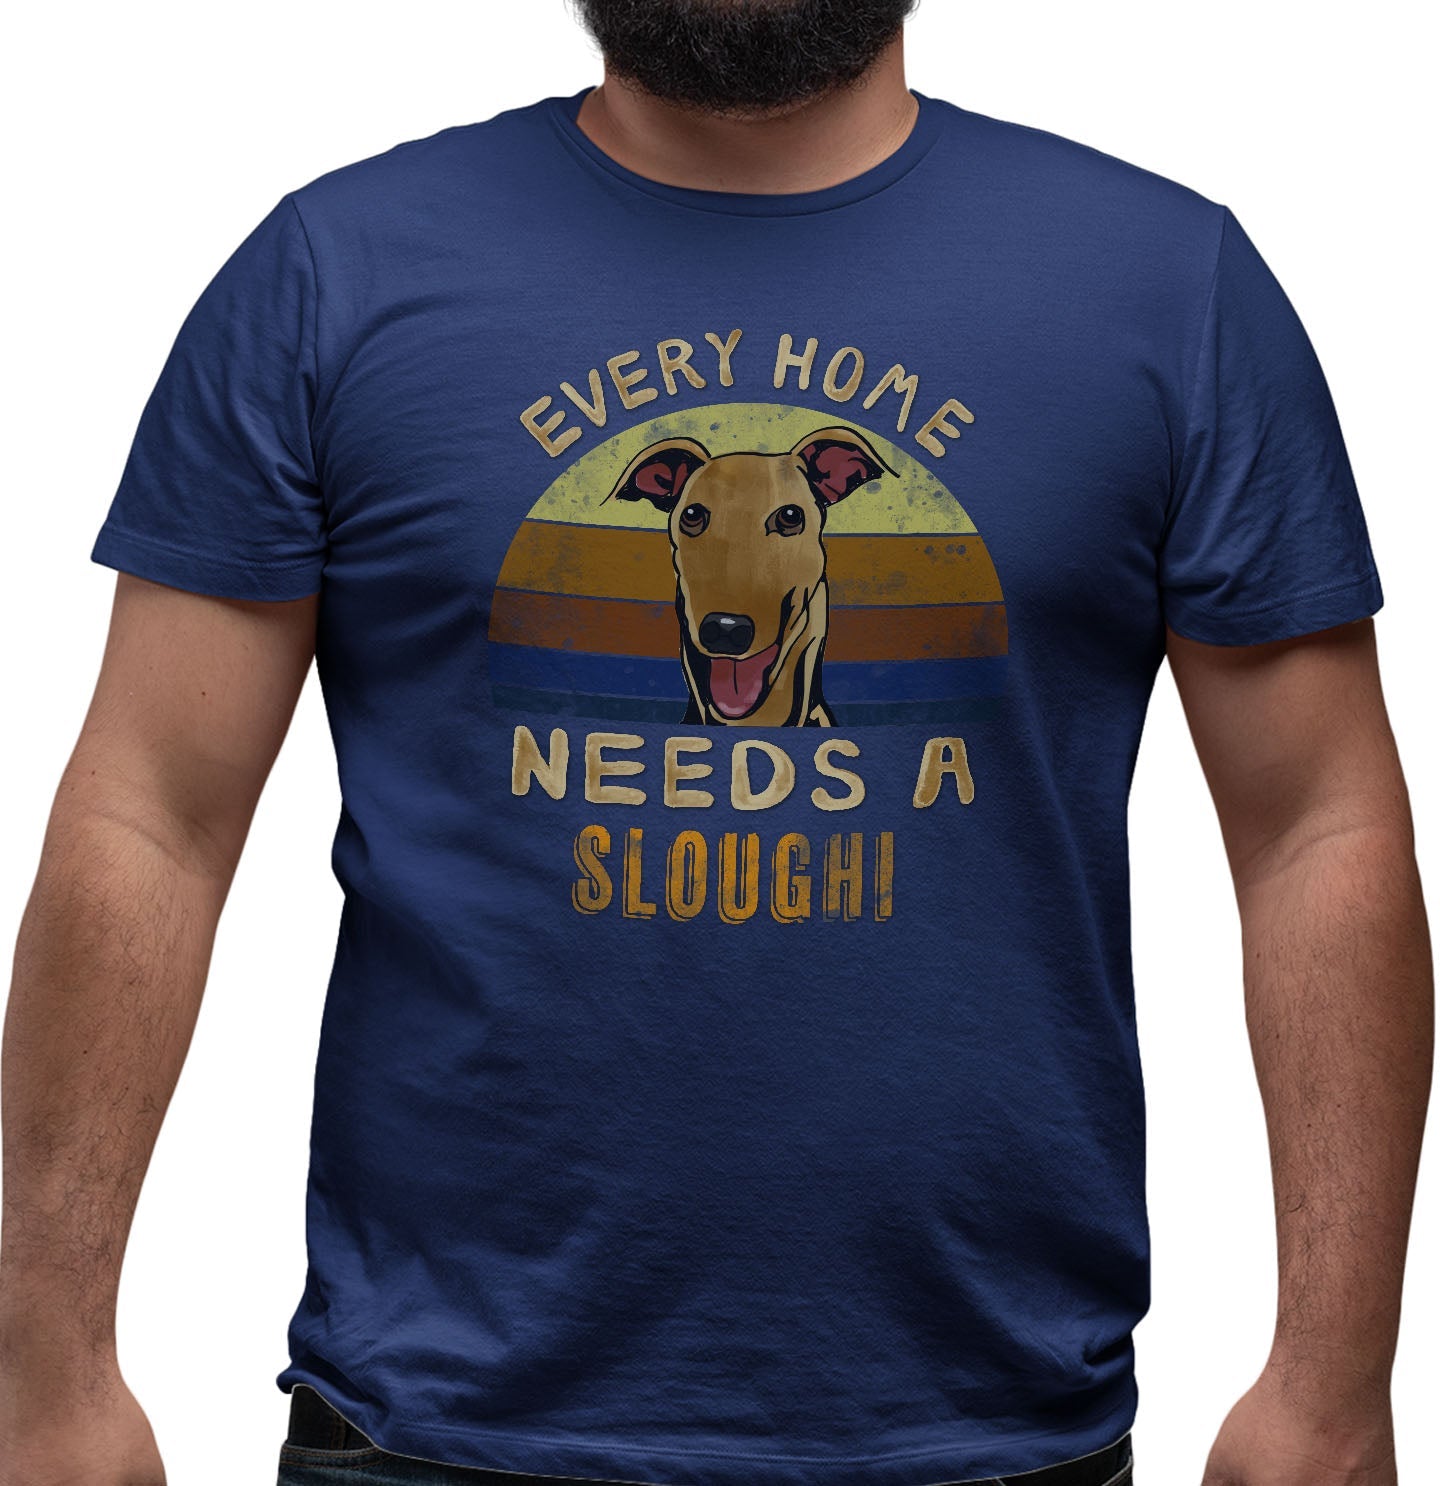 Every Home Needs a Sloughi - Adult Unisex T-Shirt